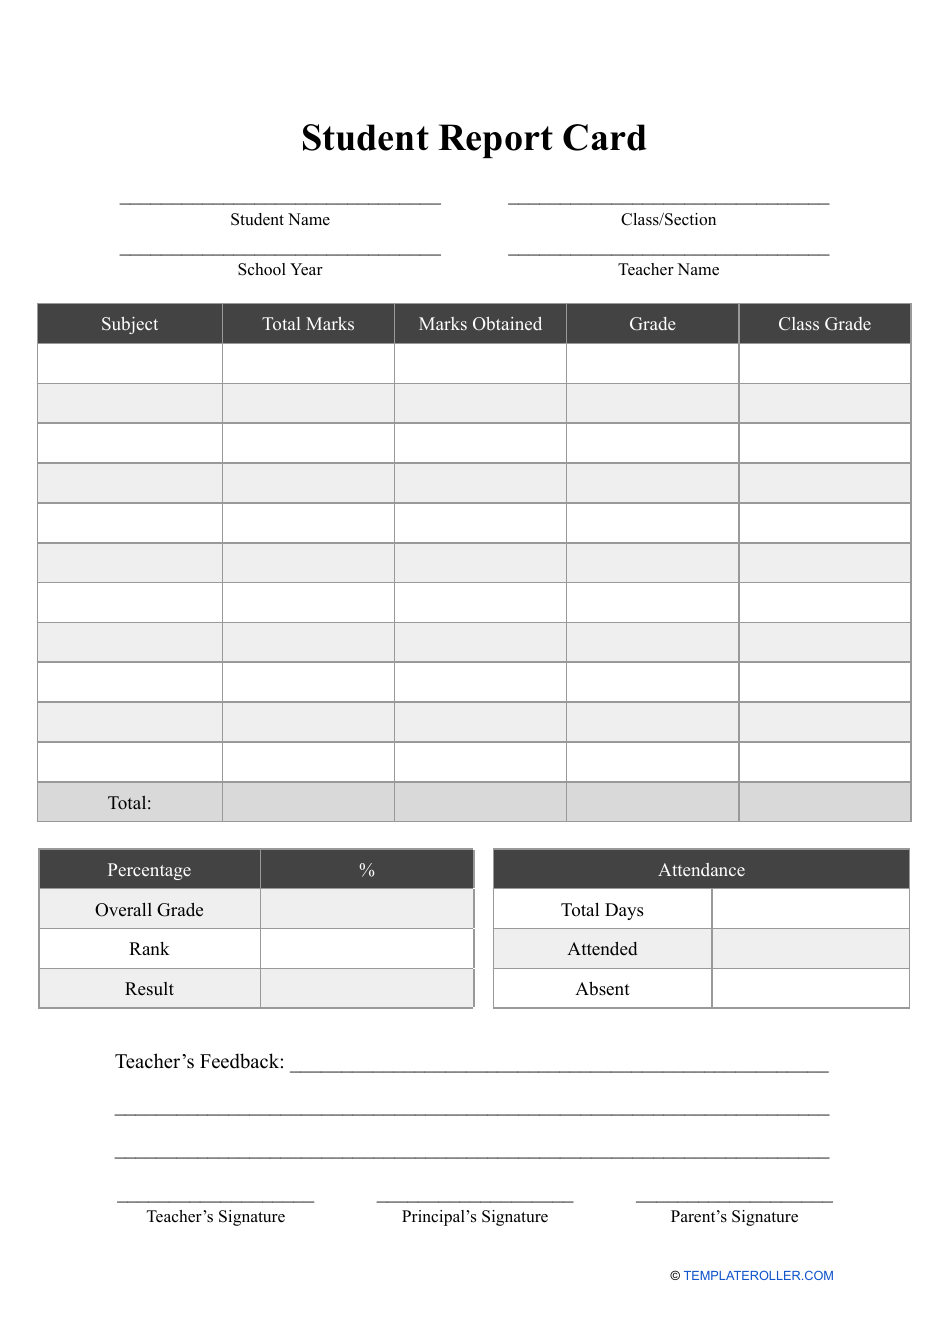 Student Report Card Template - Big Table, Page 1